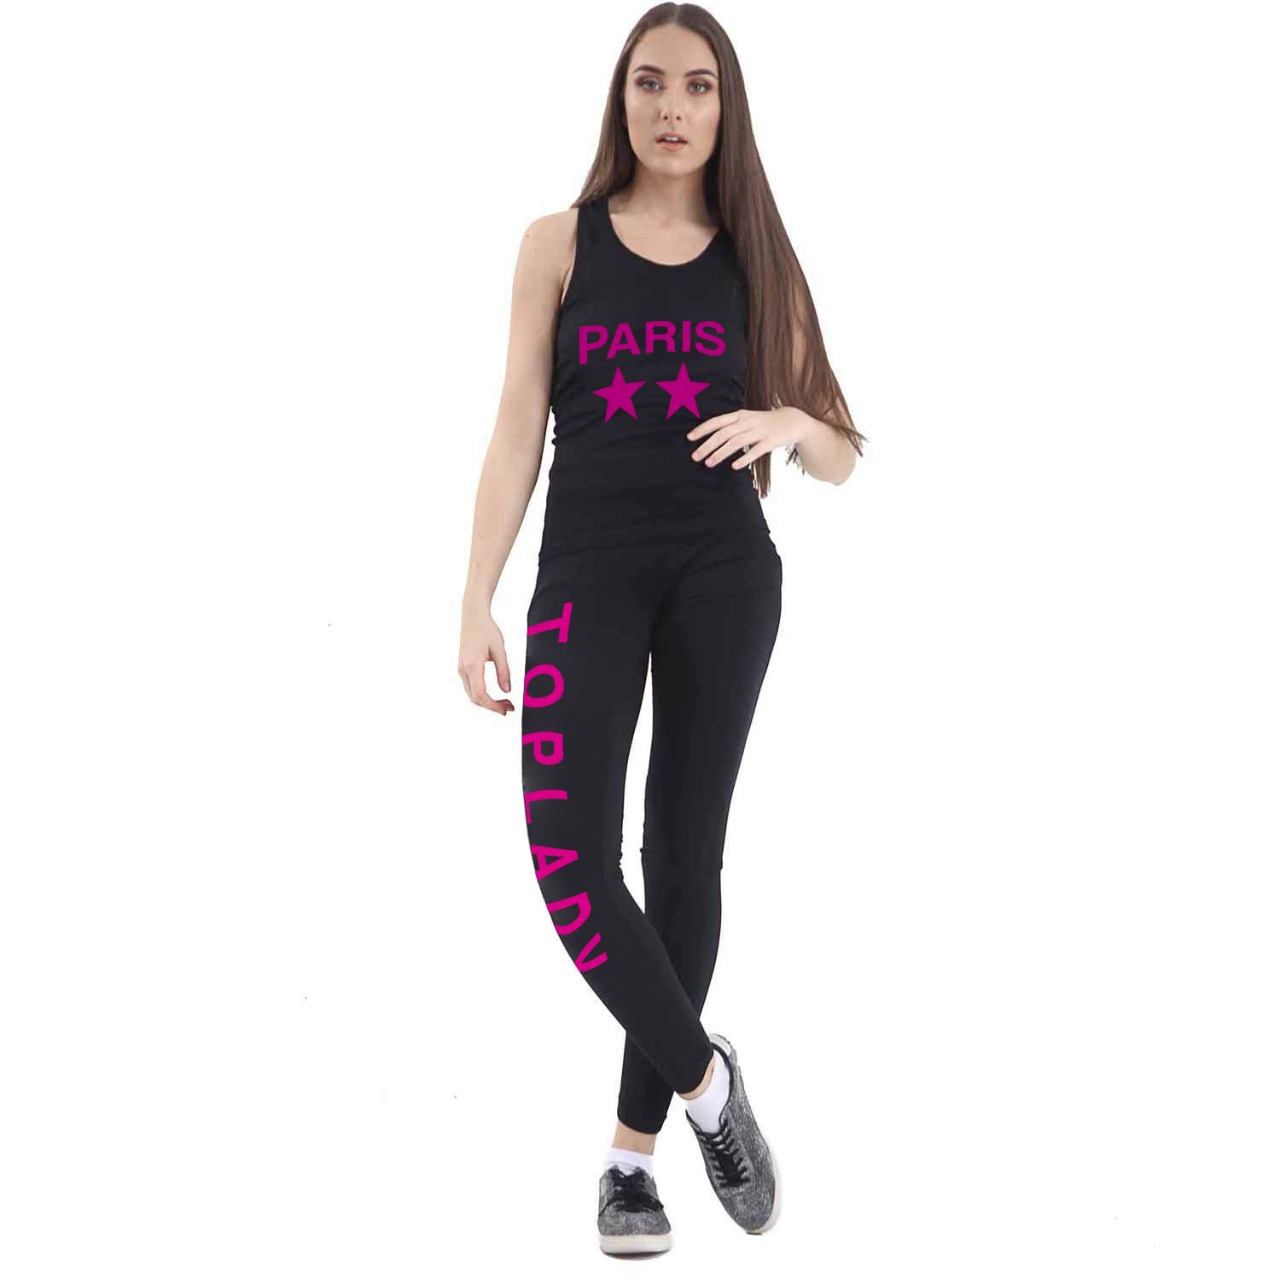 Ladies Gym and Tracking Suit For Women 